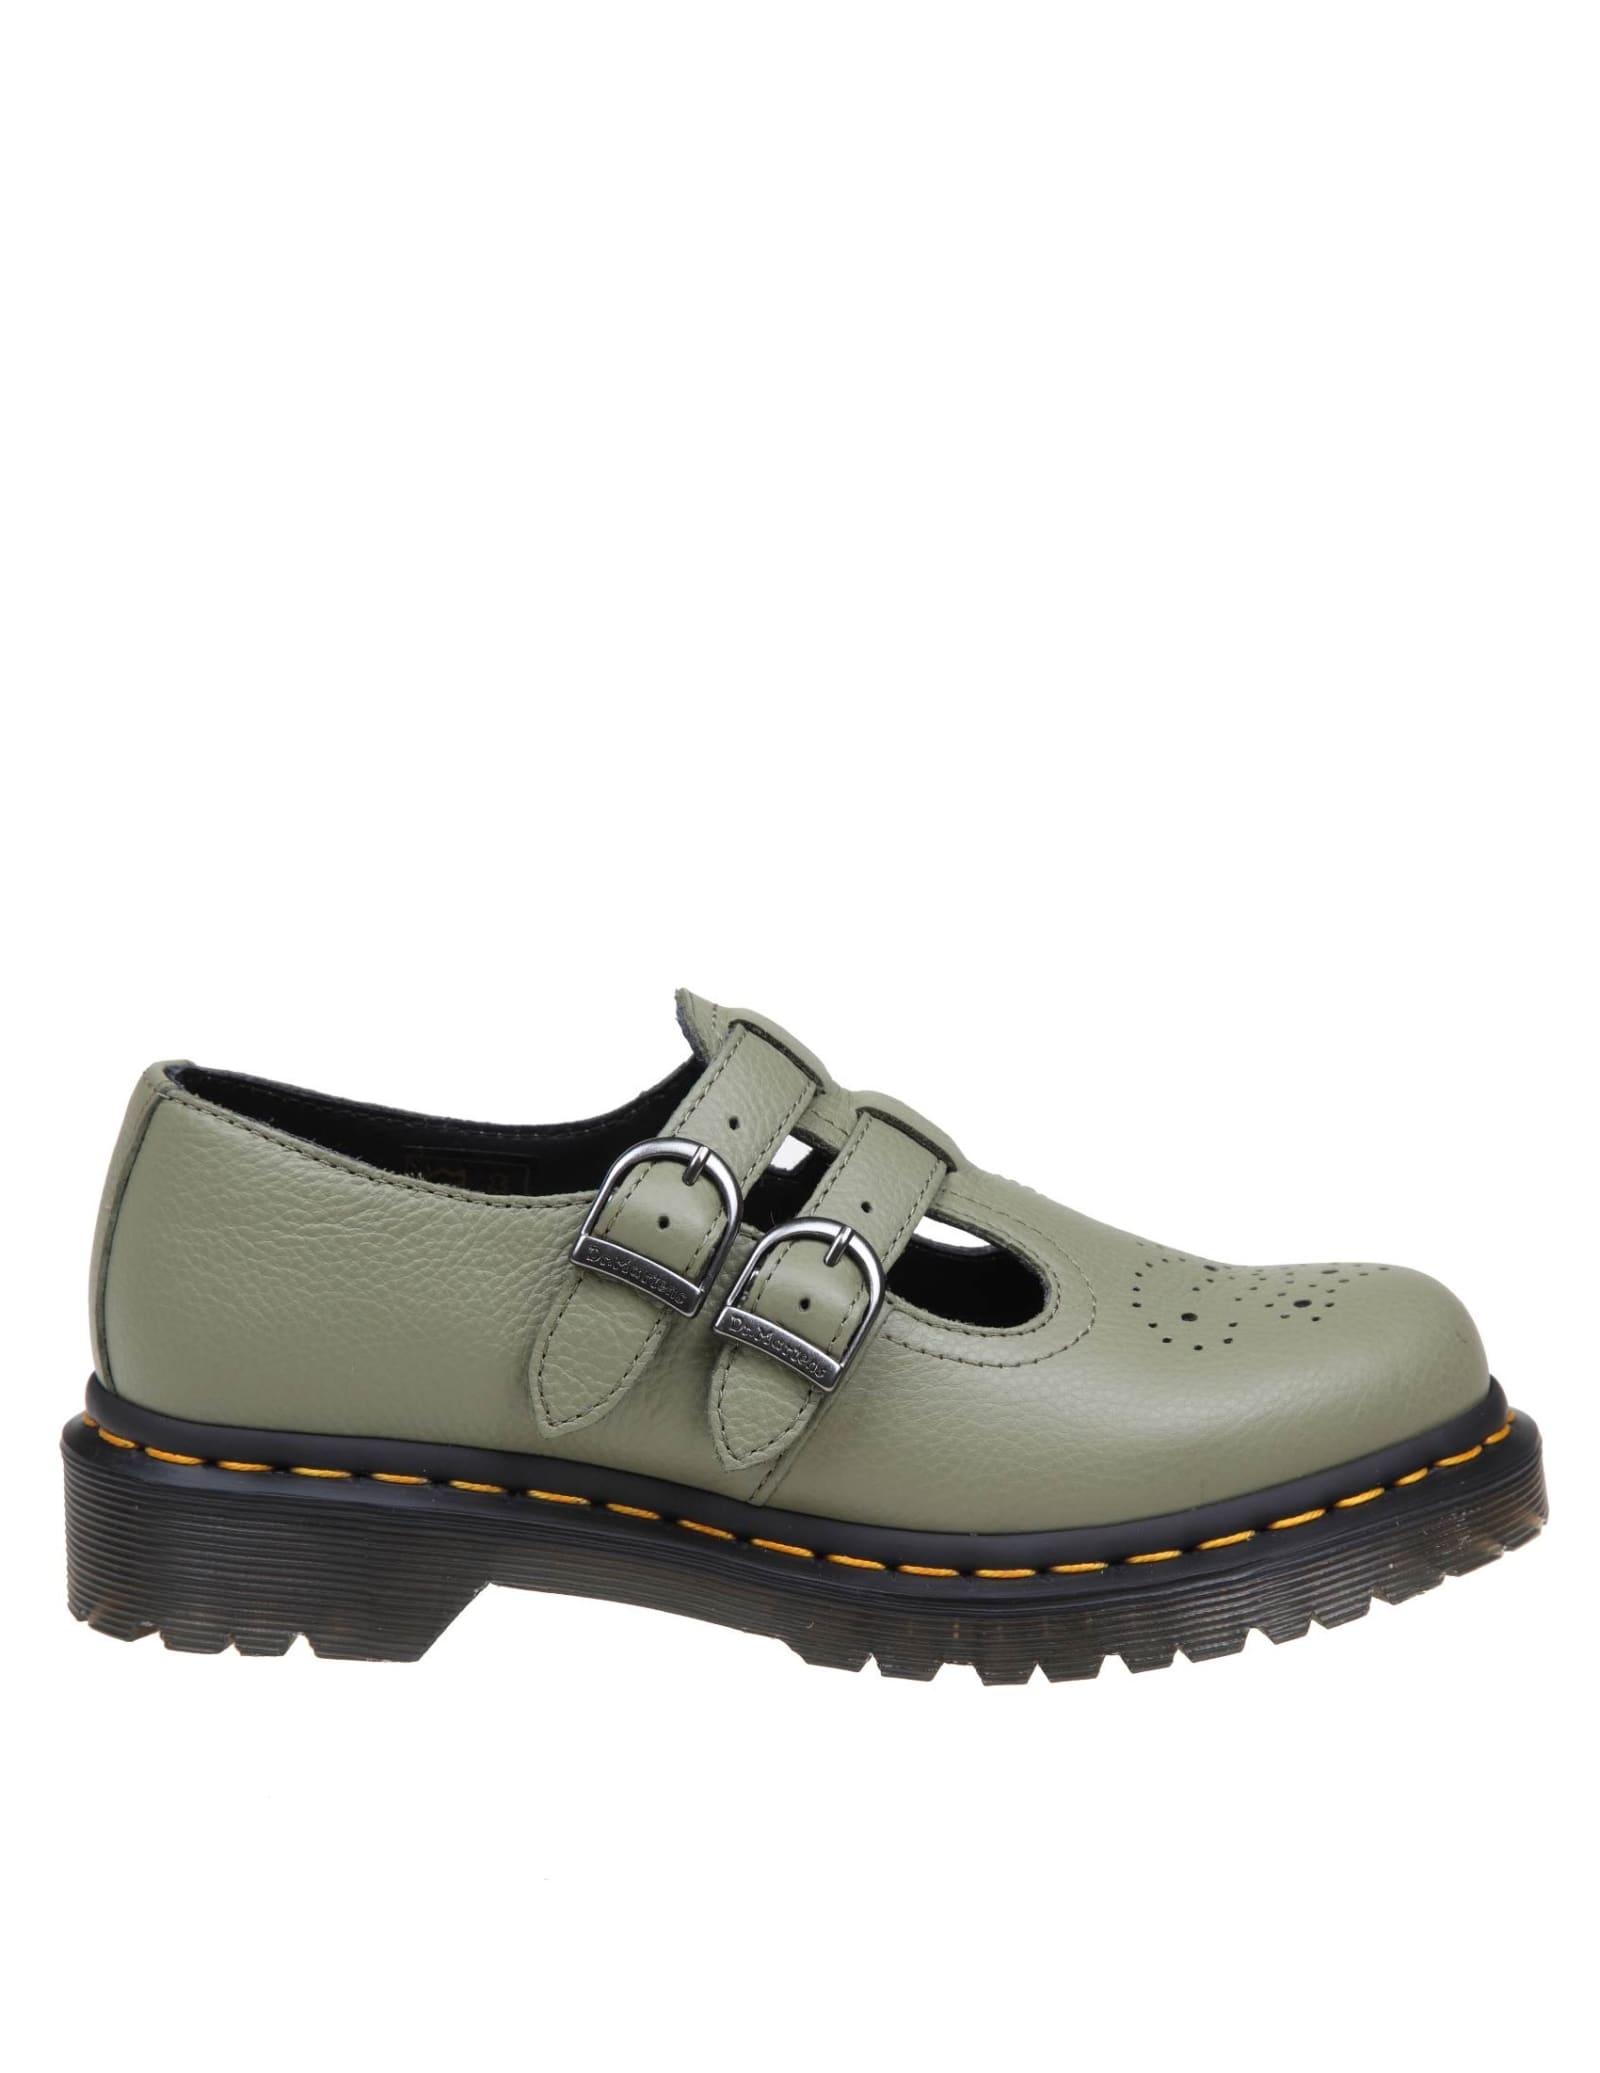 Dr. Martens 8065 Mary Jane Shoe In Olive Green Leather